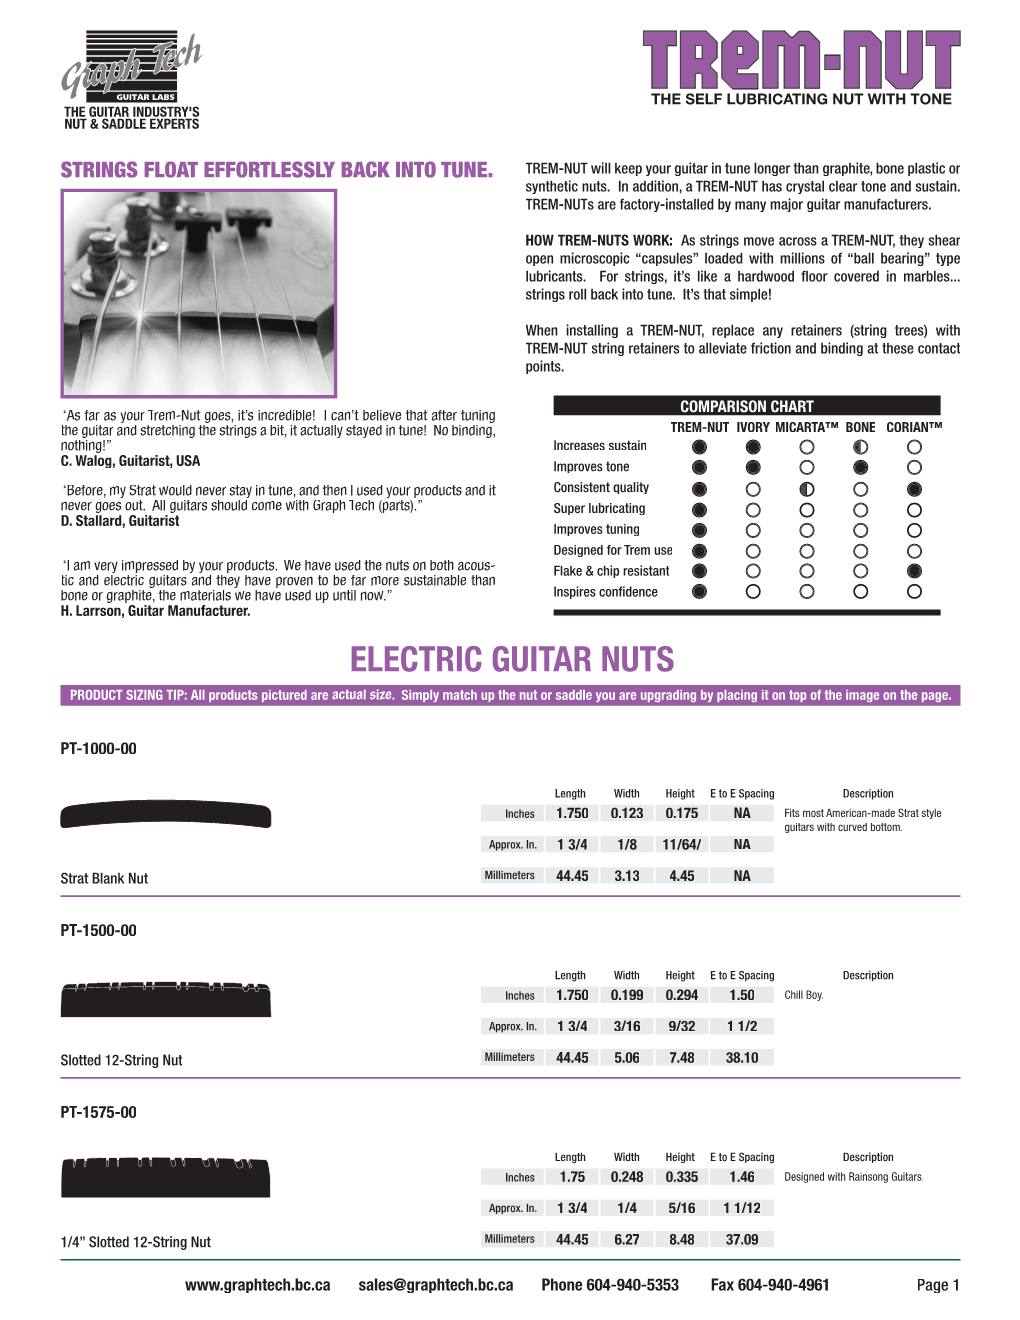 ELECTRIC GUITAR NUTS PRODUCT SIZING TIP: All Products Pictured Are Actual Size